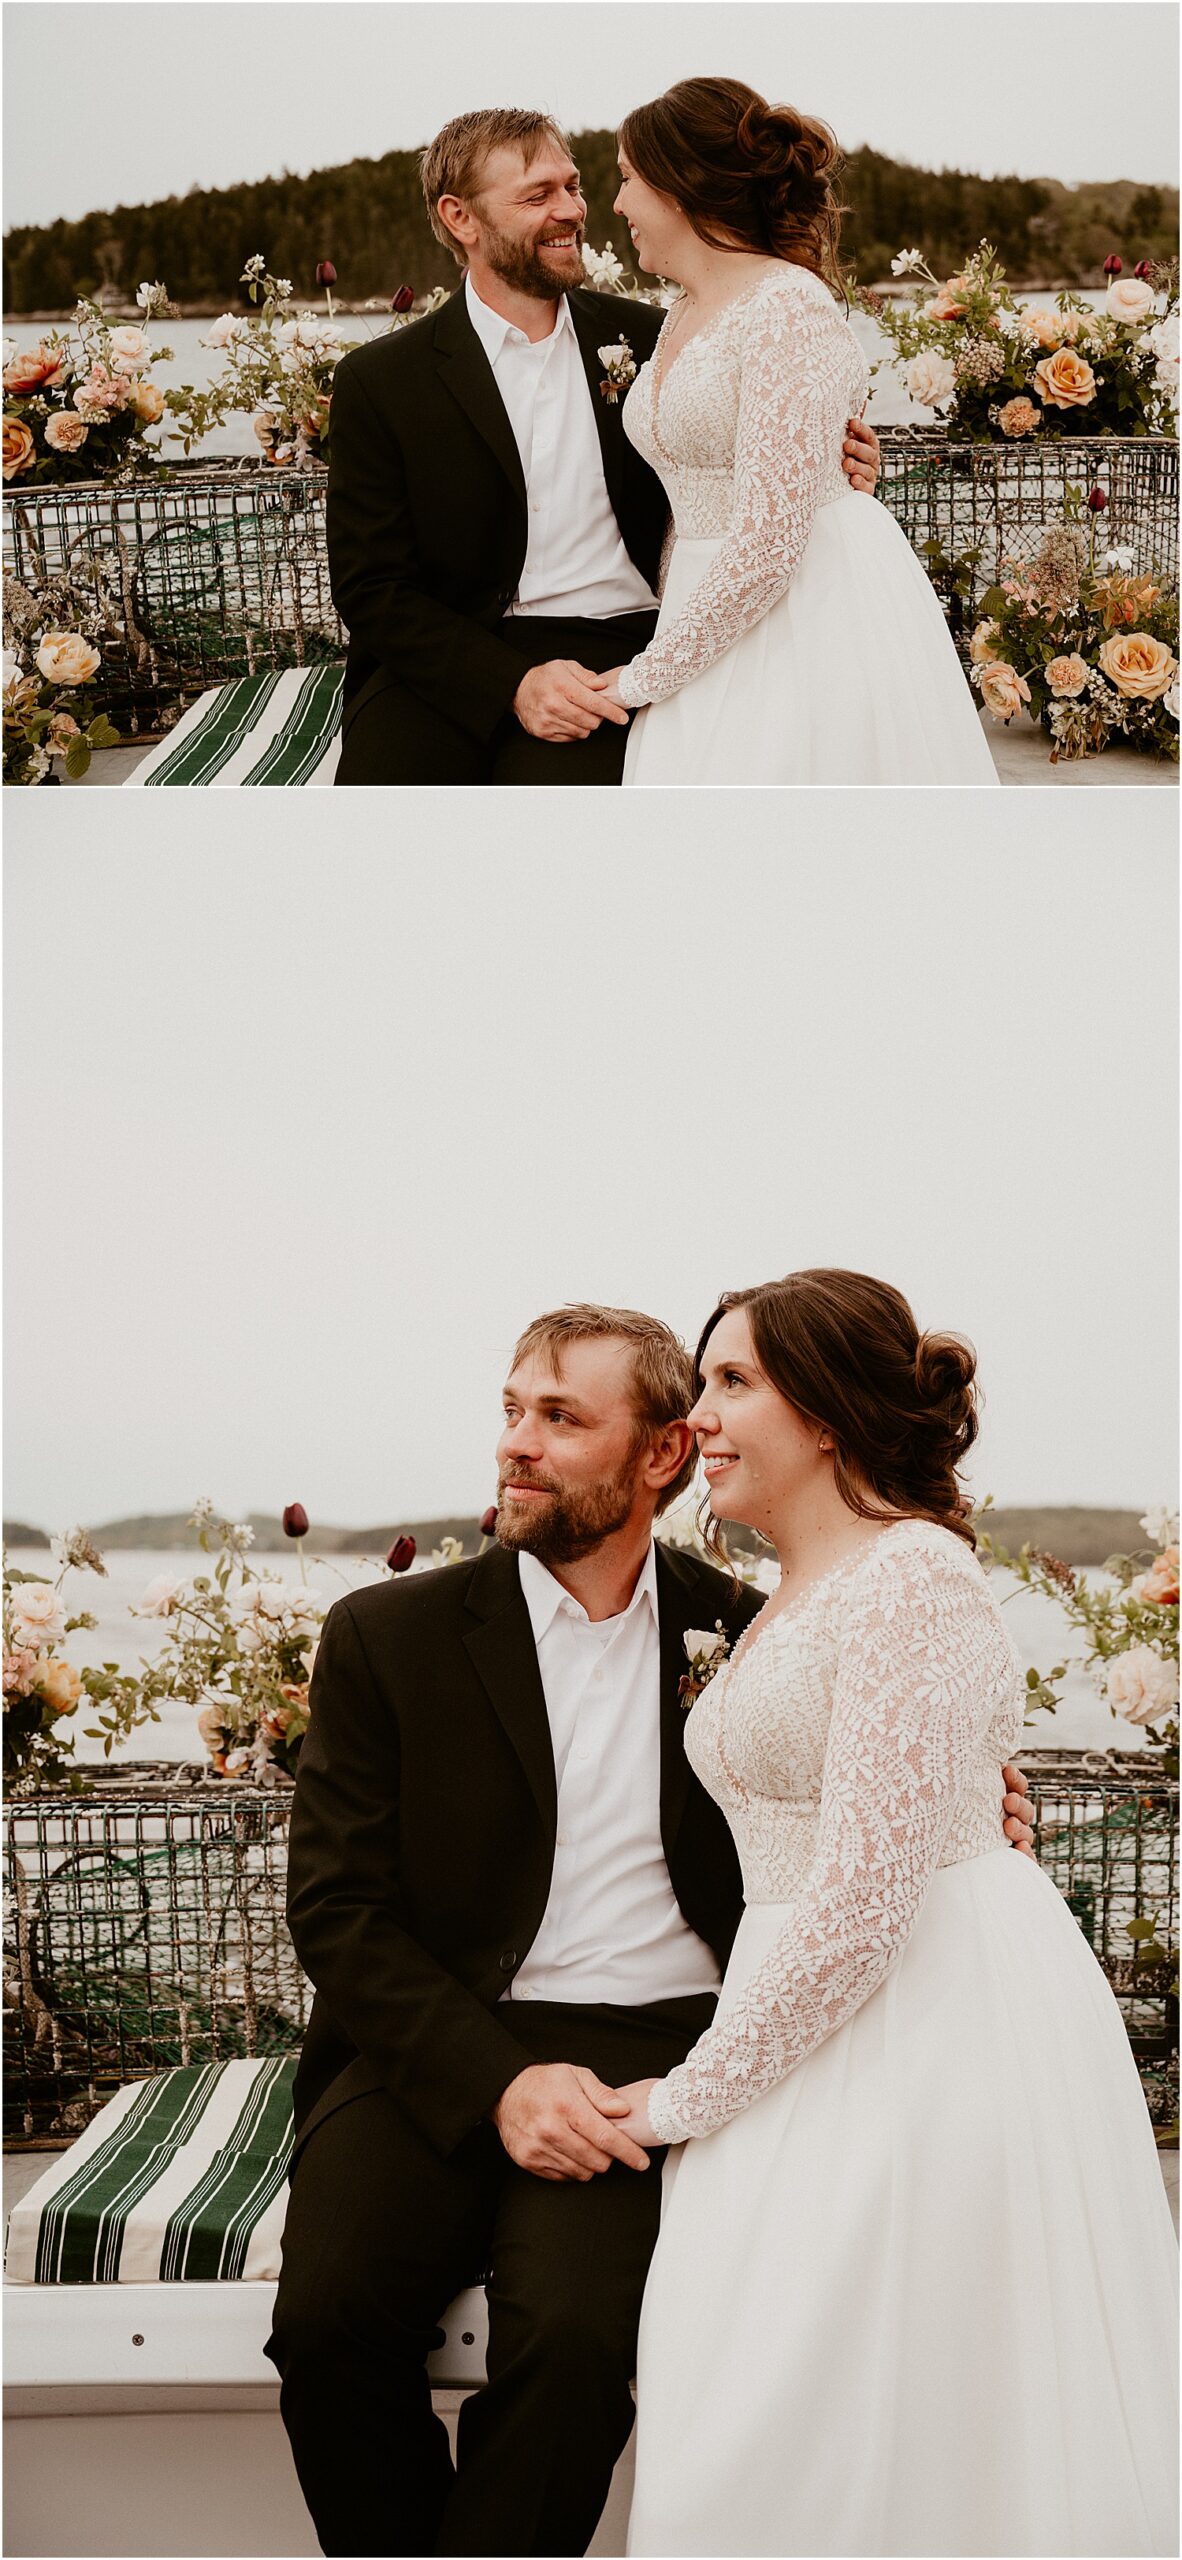 Couple admire their day for Katelyn Mallett Photography